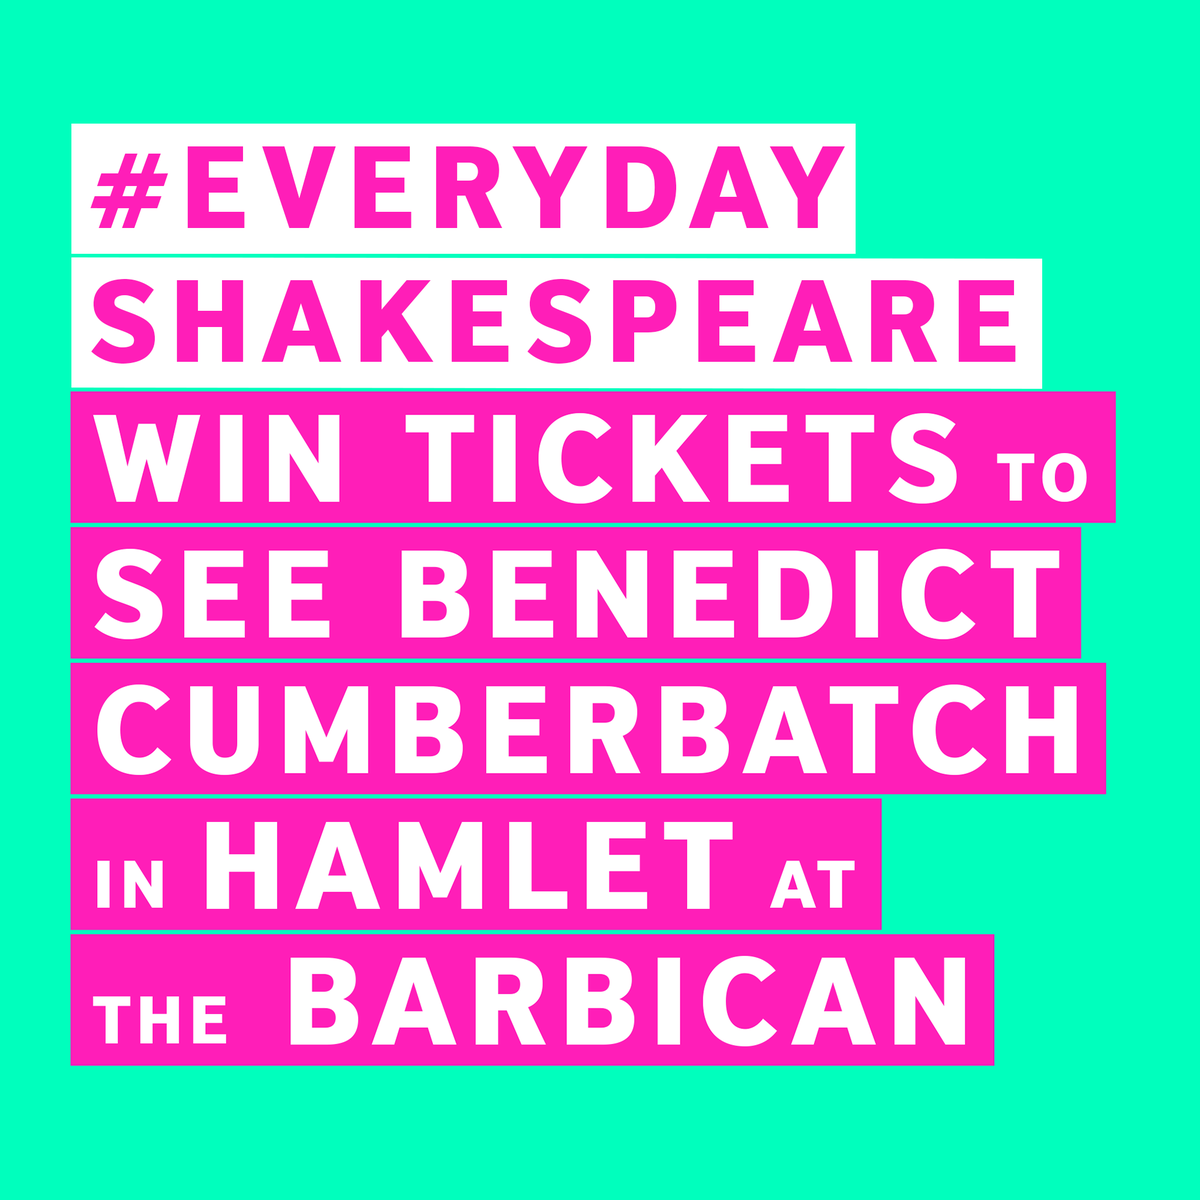 Instagrammers, our #EverydayShakespeare competition closes at 13.00 UK time today! ow.ly/TqLkF